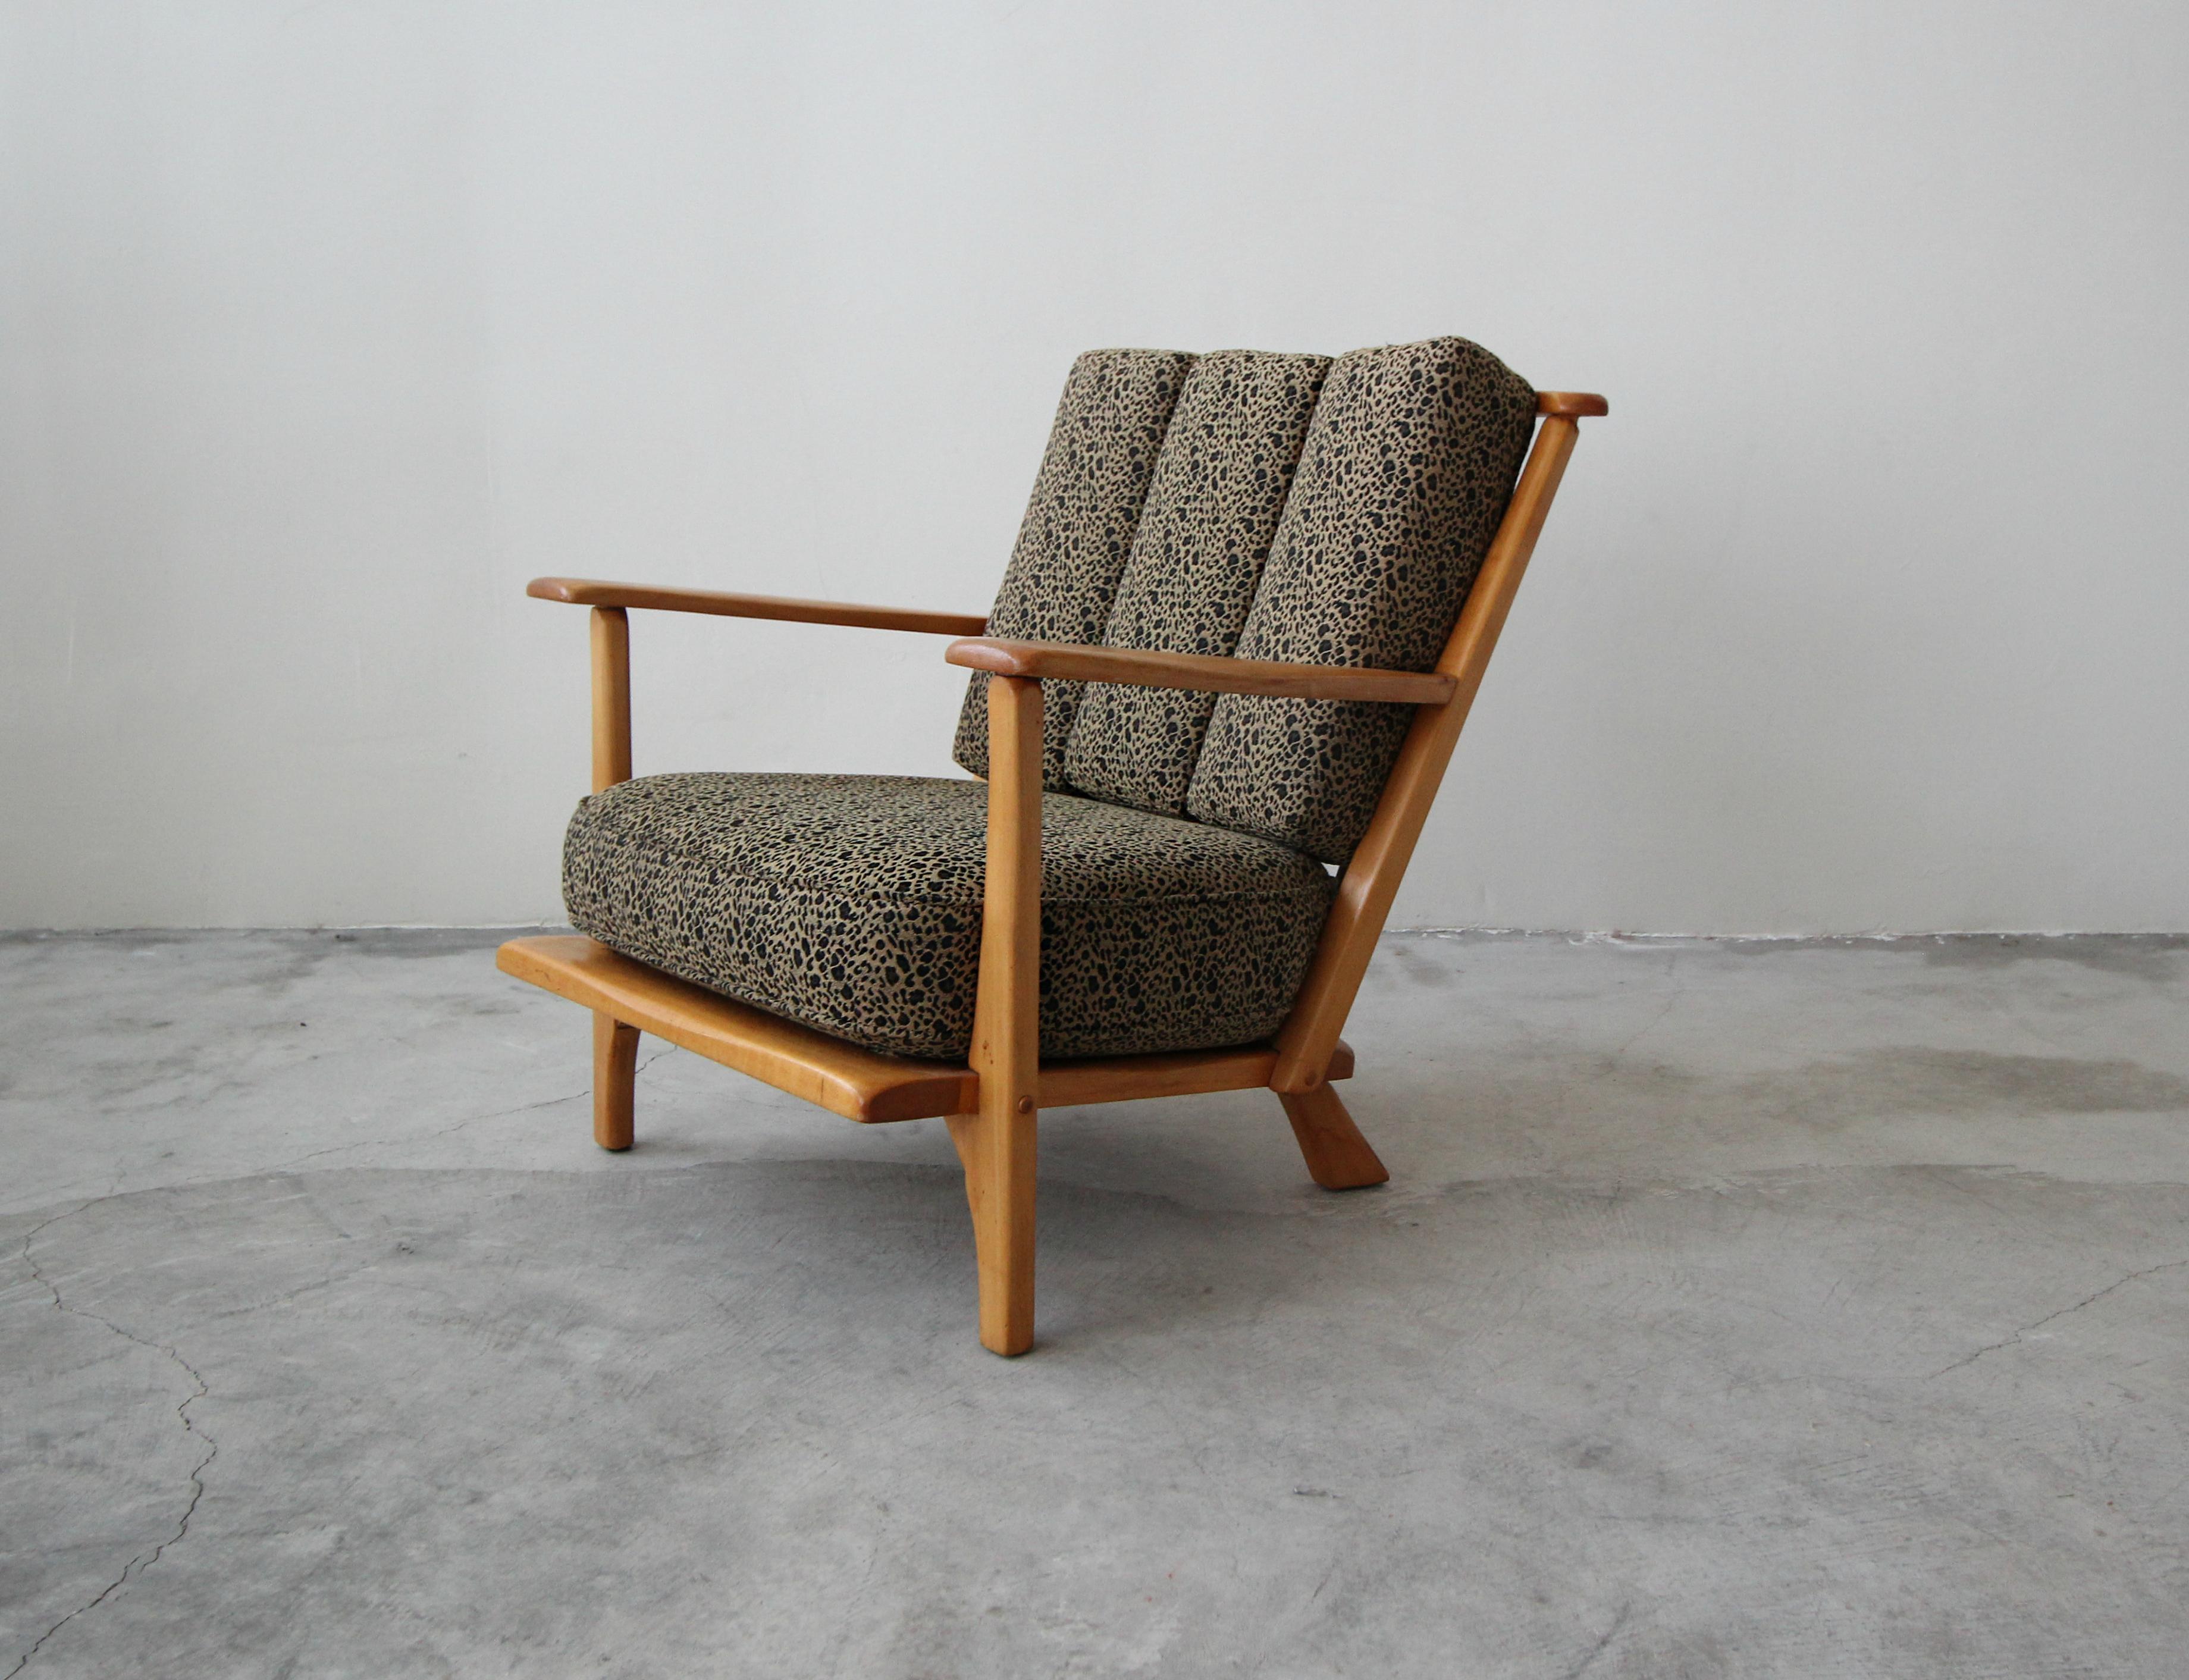 A perfect example of early midcentury craftsmanship at it's finest. Designed by Herman De Vries for Cushman in 1956, it is constructed of solid maple wood with a beautifully angled back, large dowel joints and hand carved legs, no detail was over